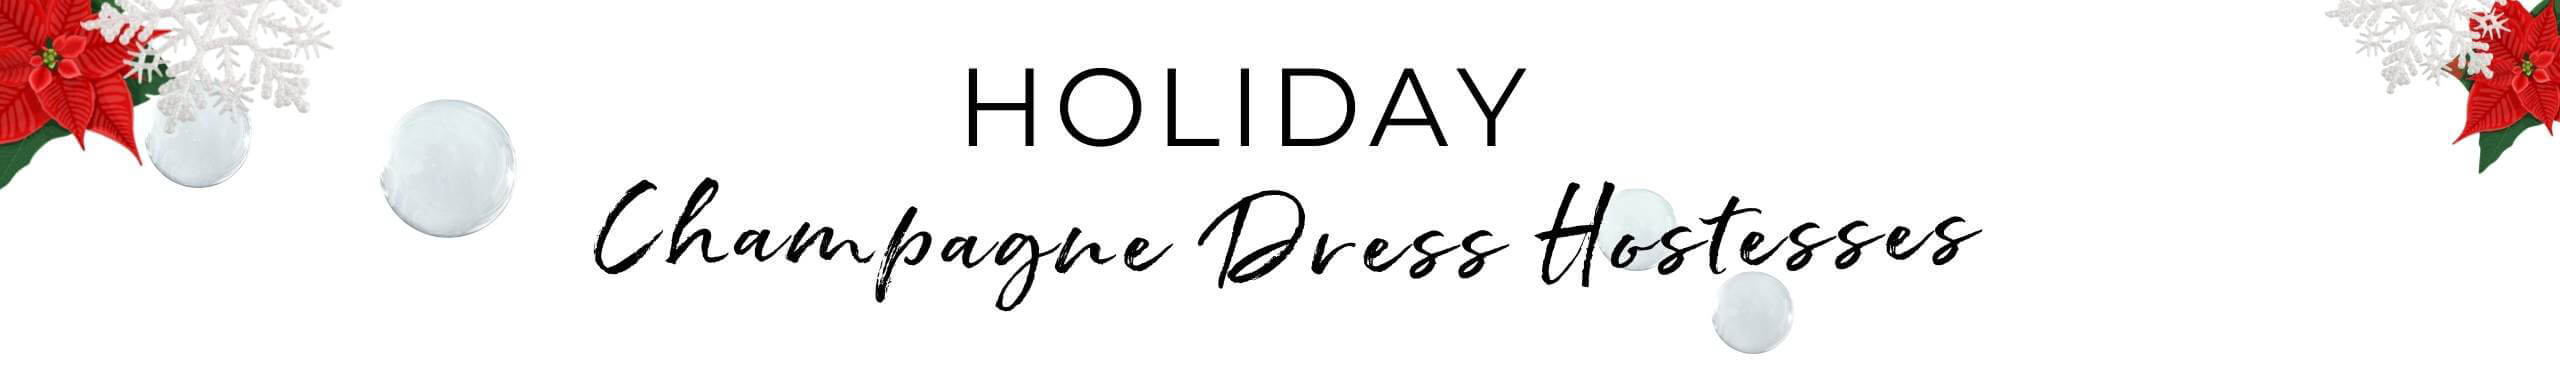 Champagne Dress Hostess & Champagne Skirts for Holiday Parties 